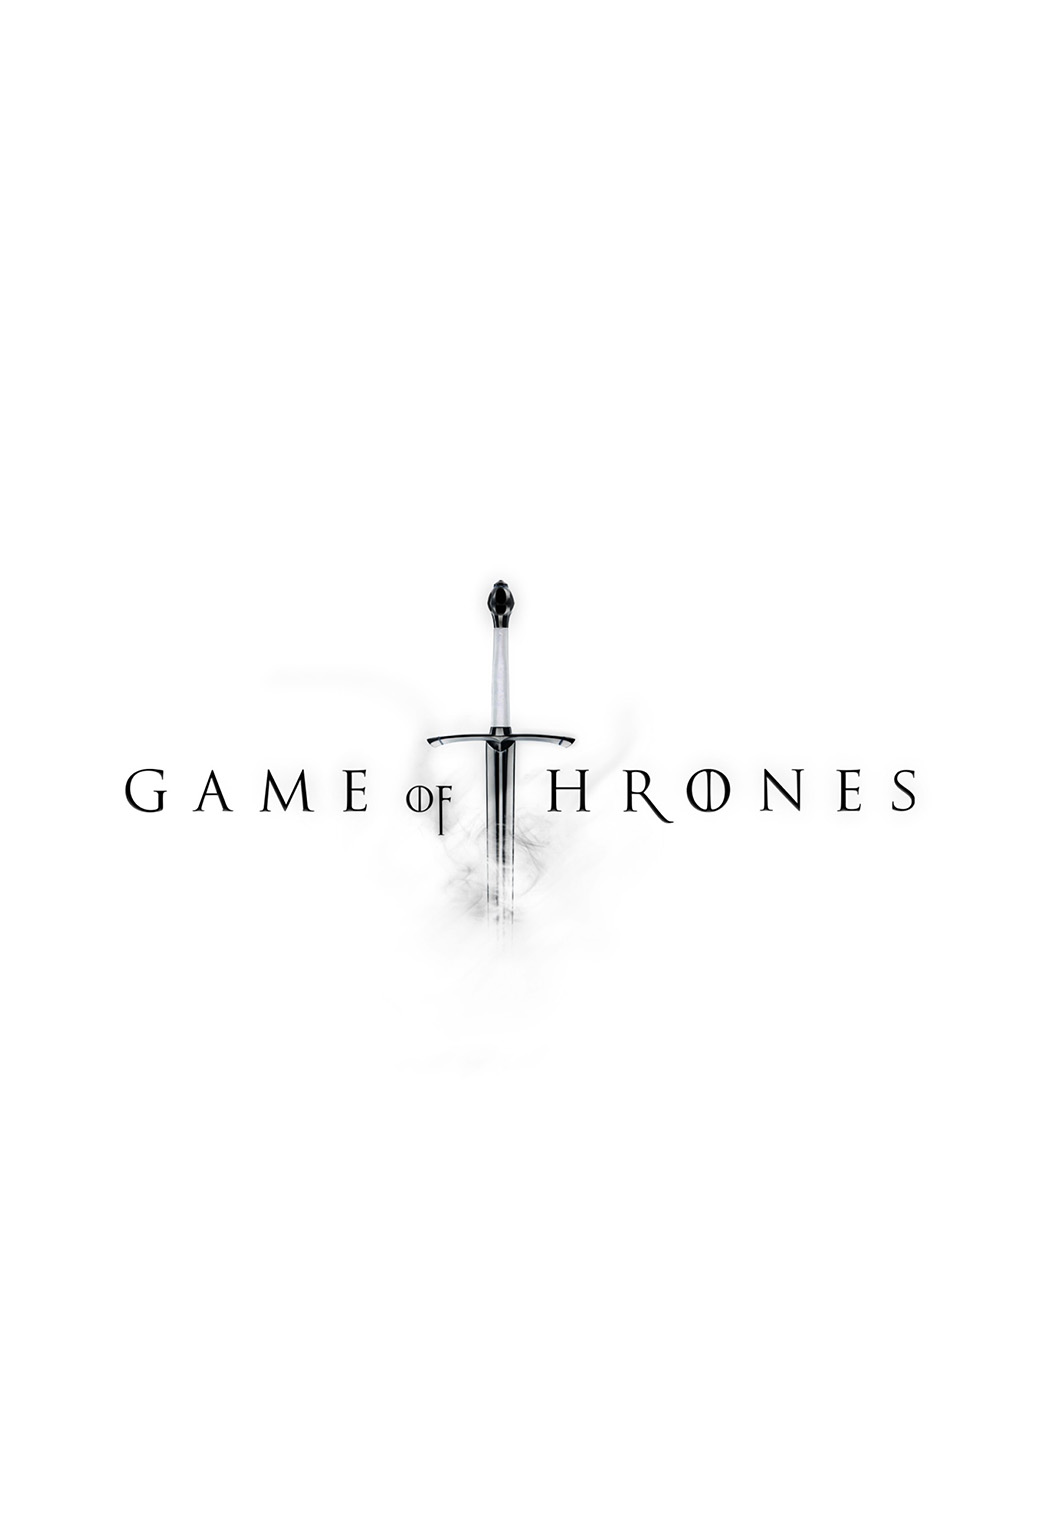 Game of Thrones wallpapers for iPhone and iPad